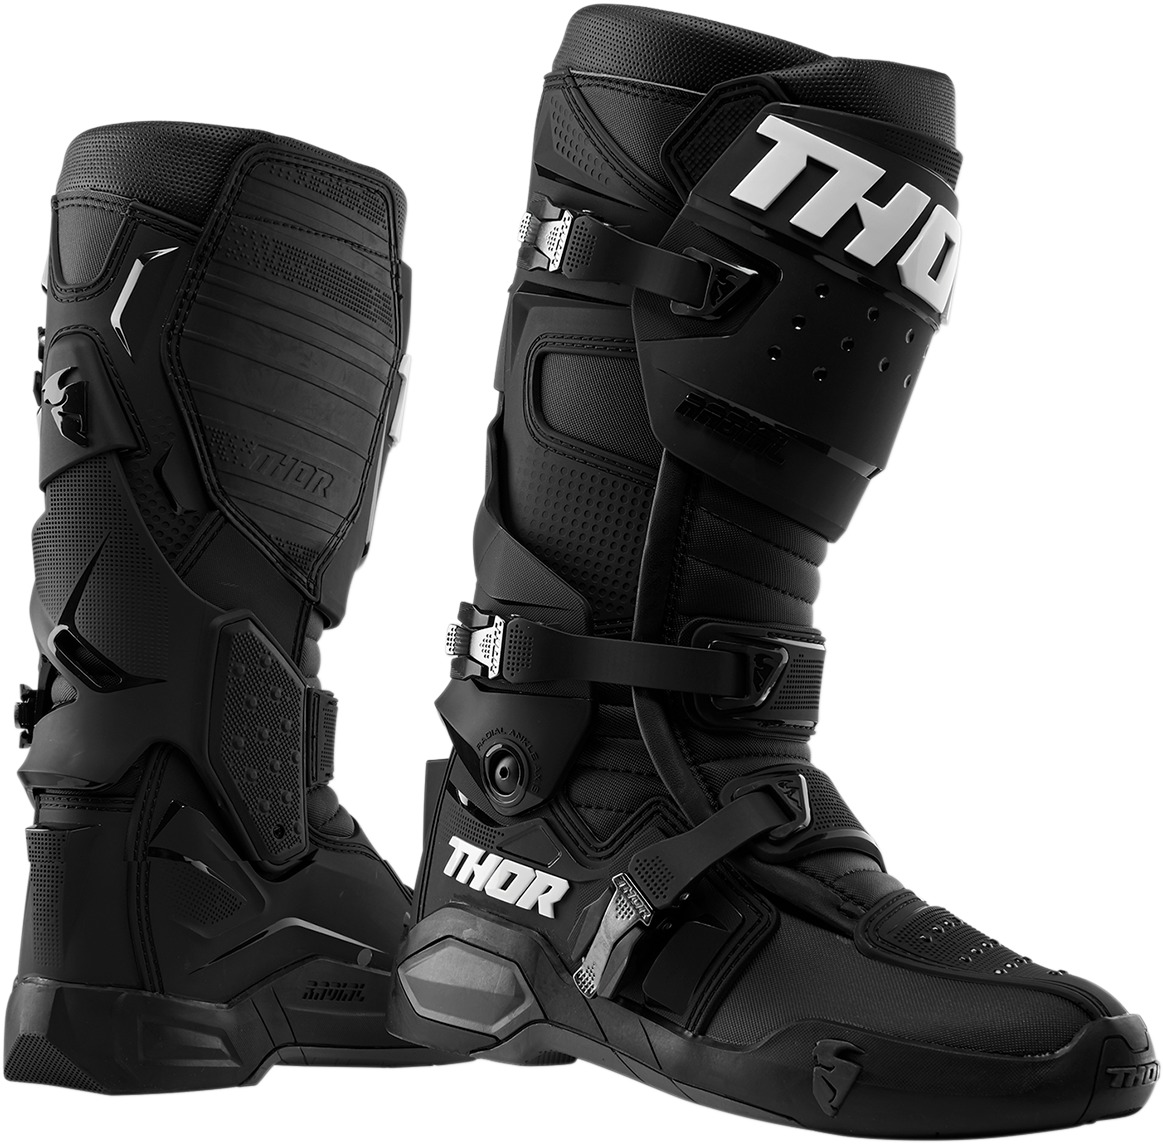 Radial Dirt Bike Boots - Black Men's Size 15 - Click Image to Close